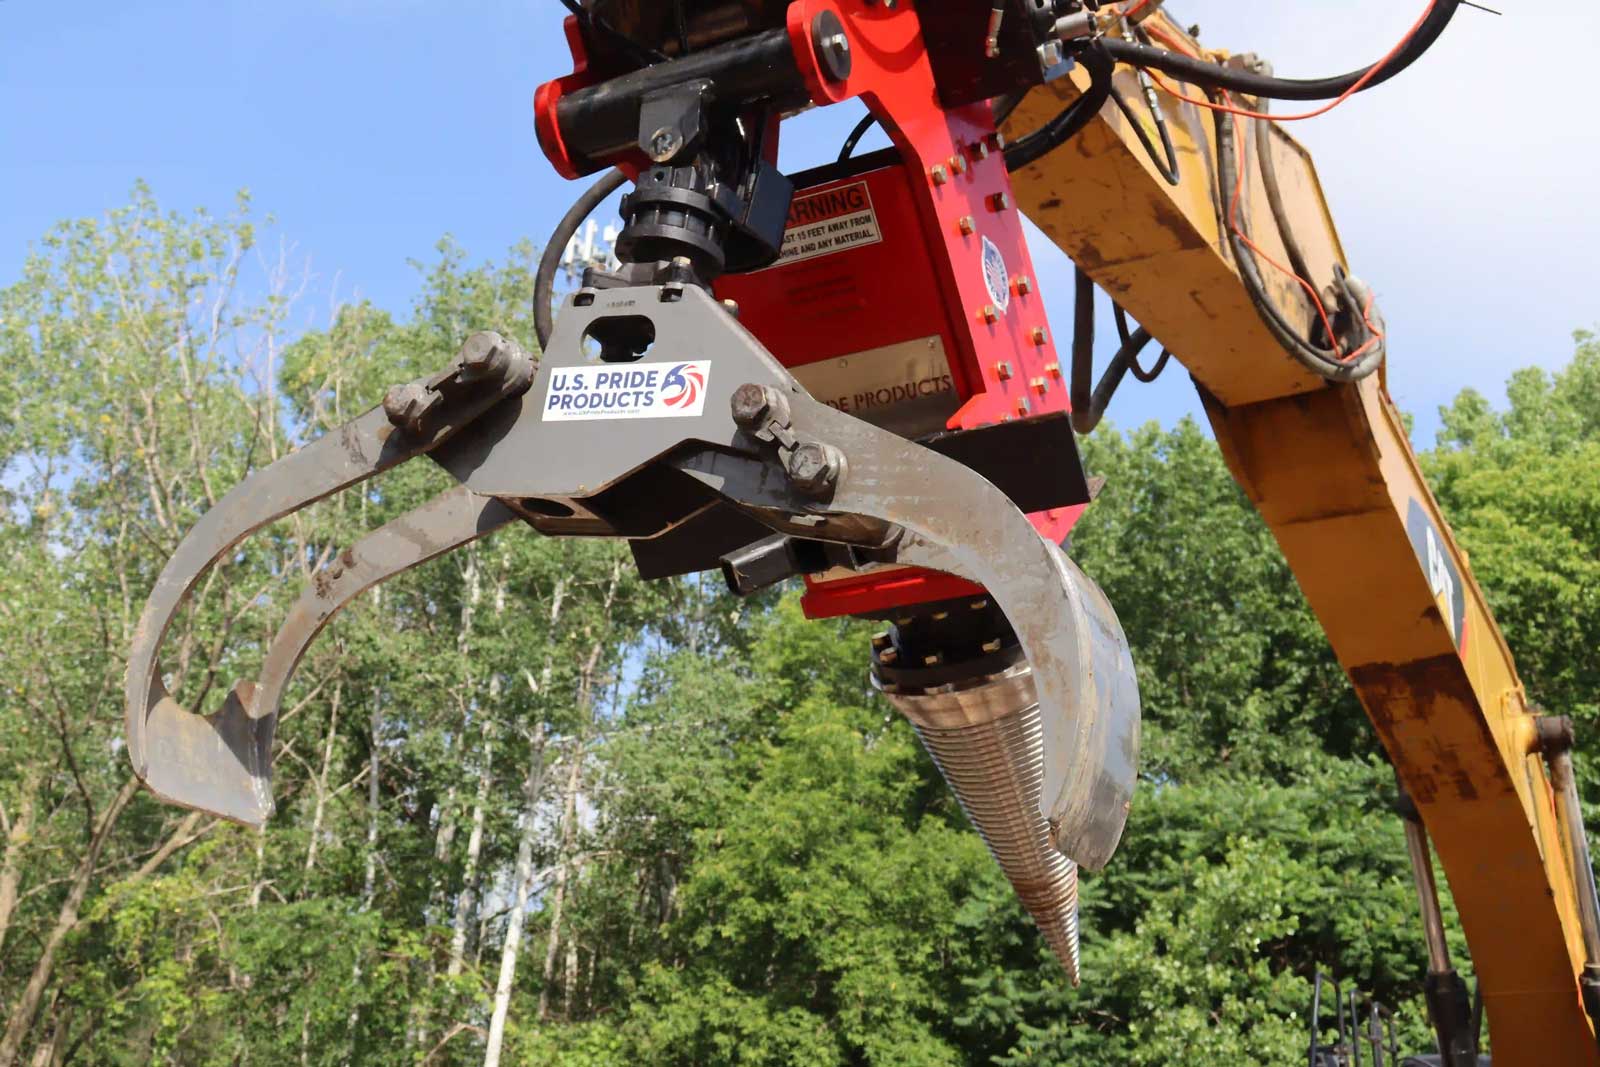 HF-800 with Grapple ready to pick up logs